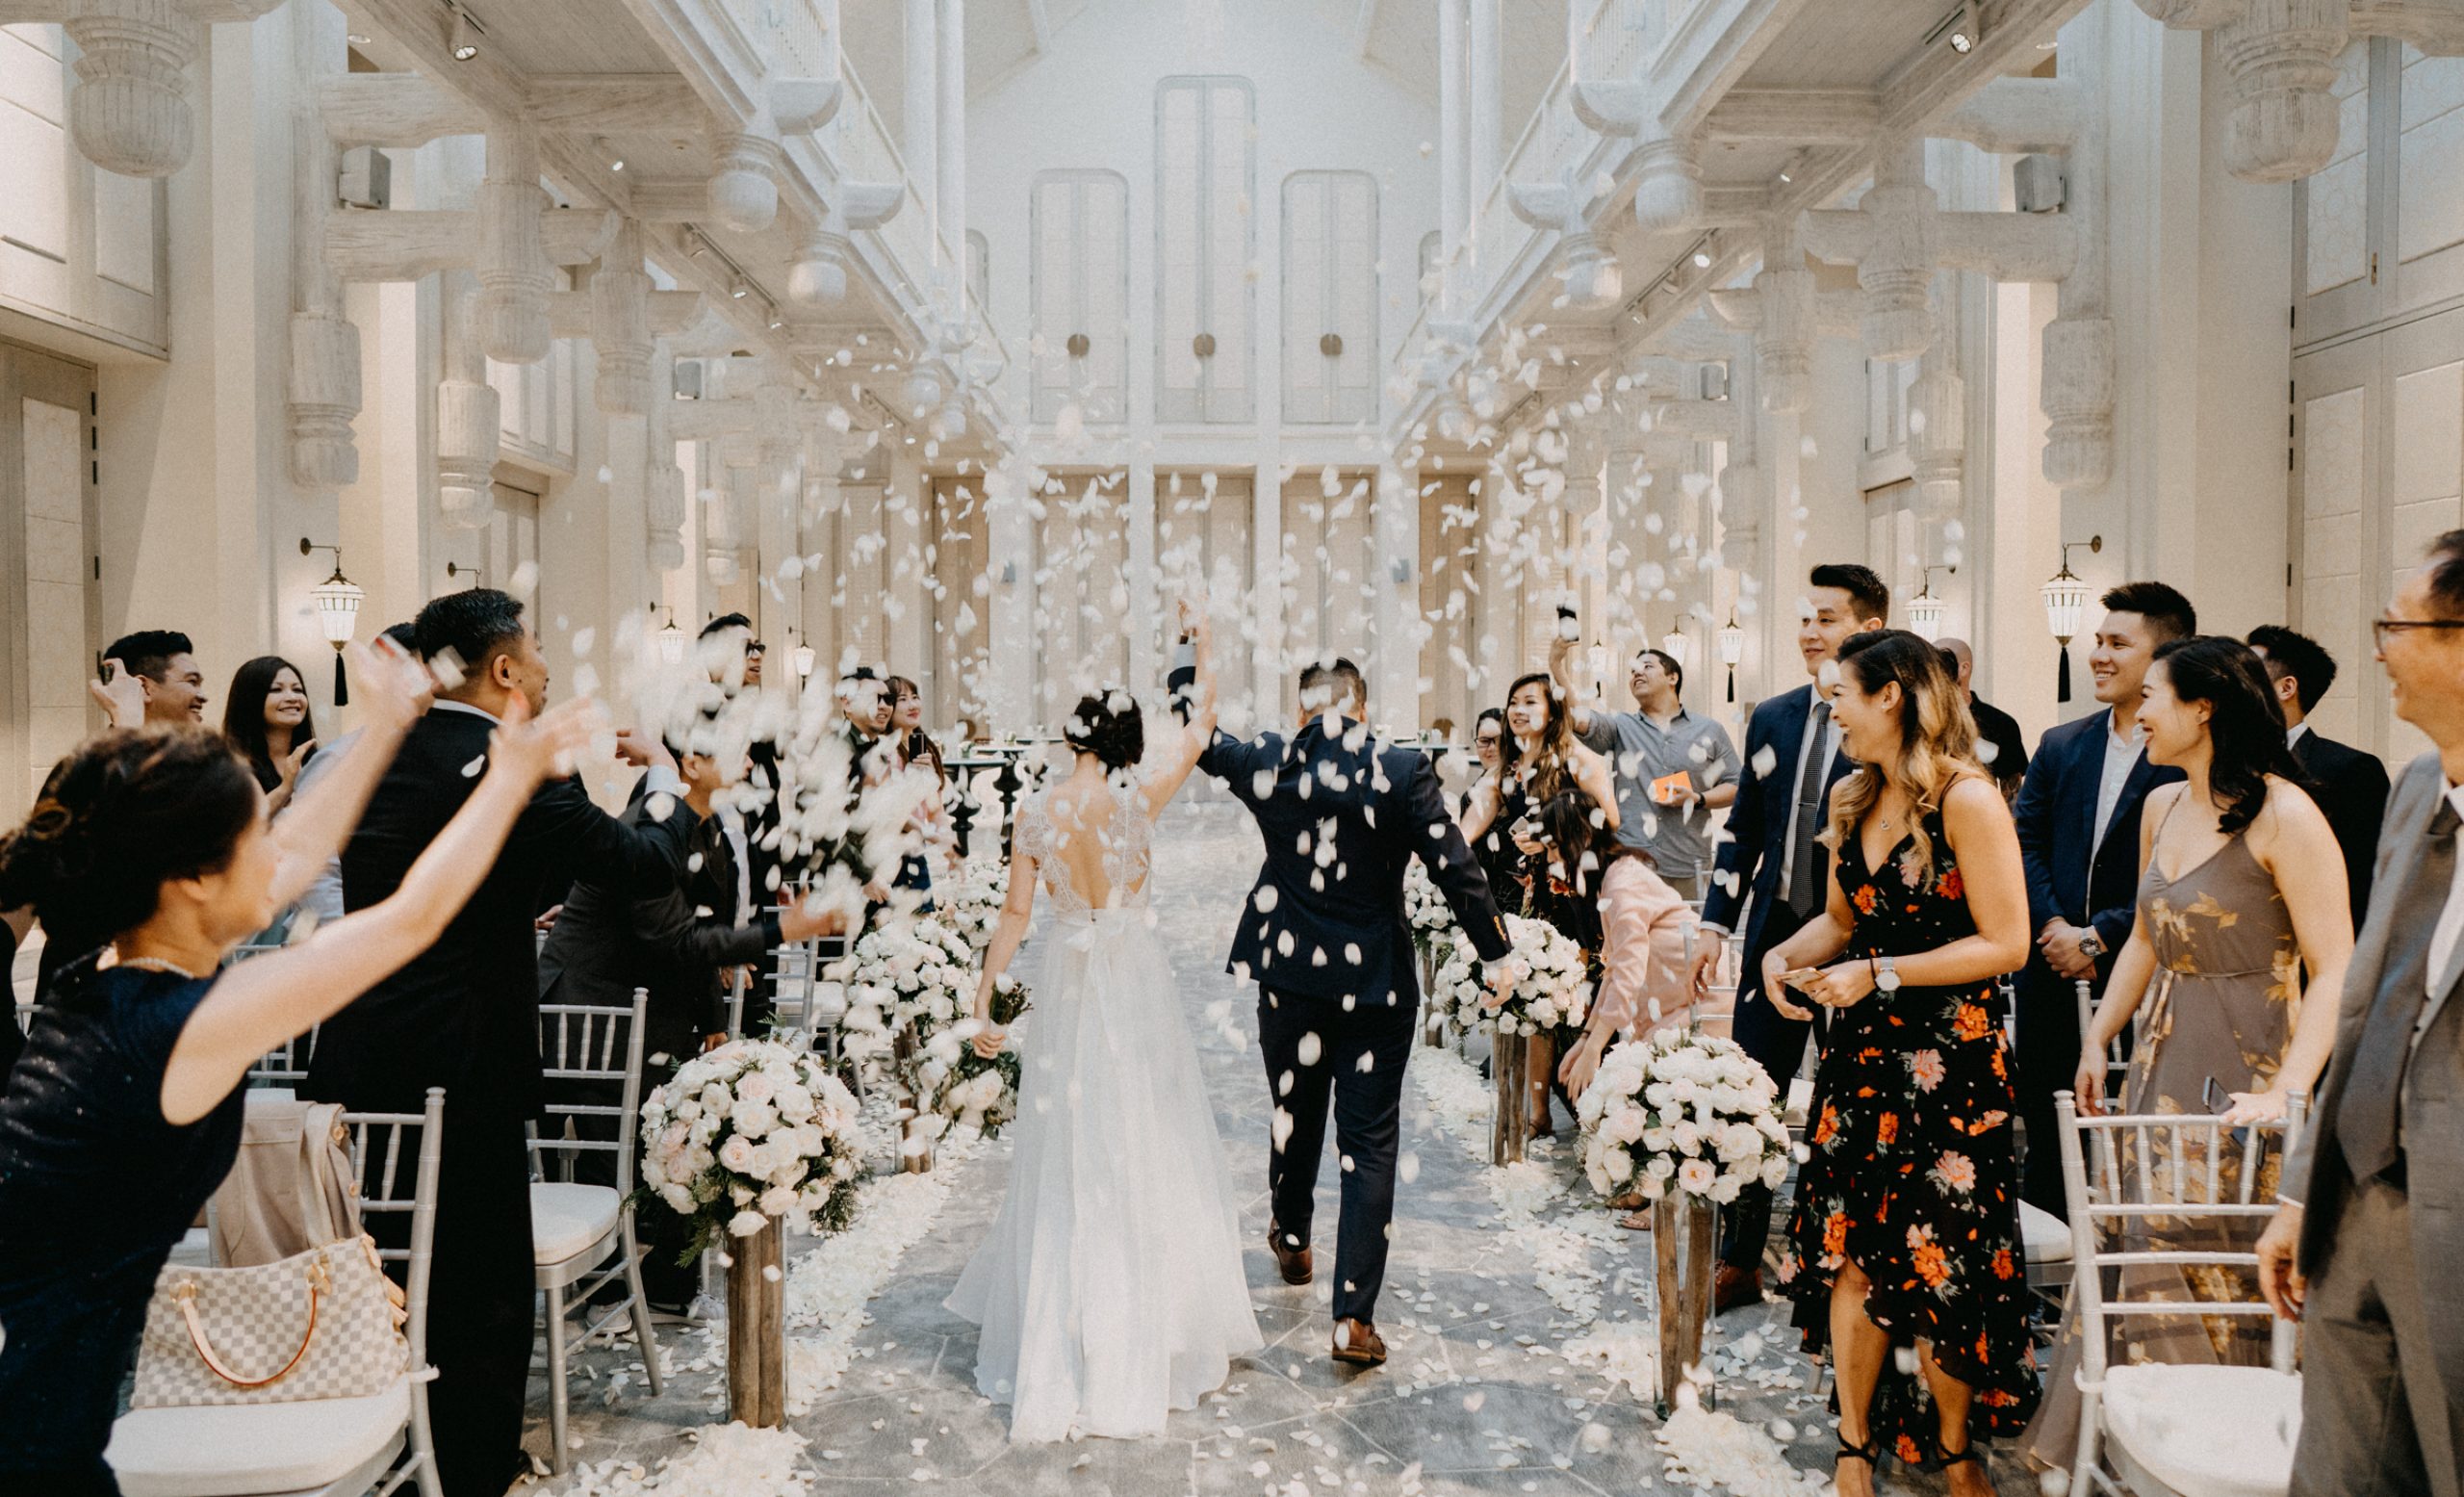 Groom and bride walking on aisle at Reception hall, surrounding by guests